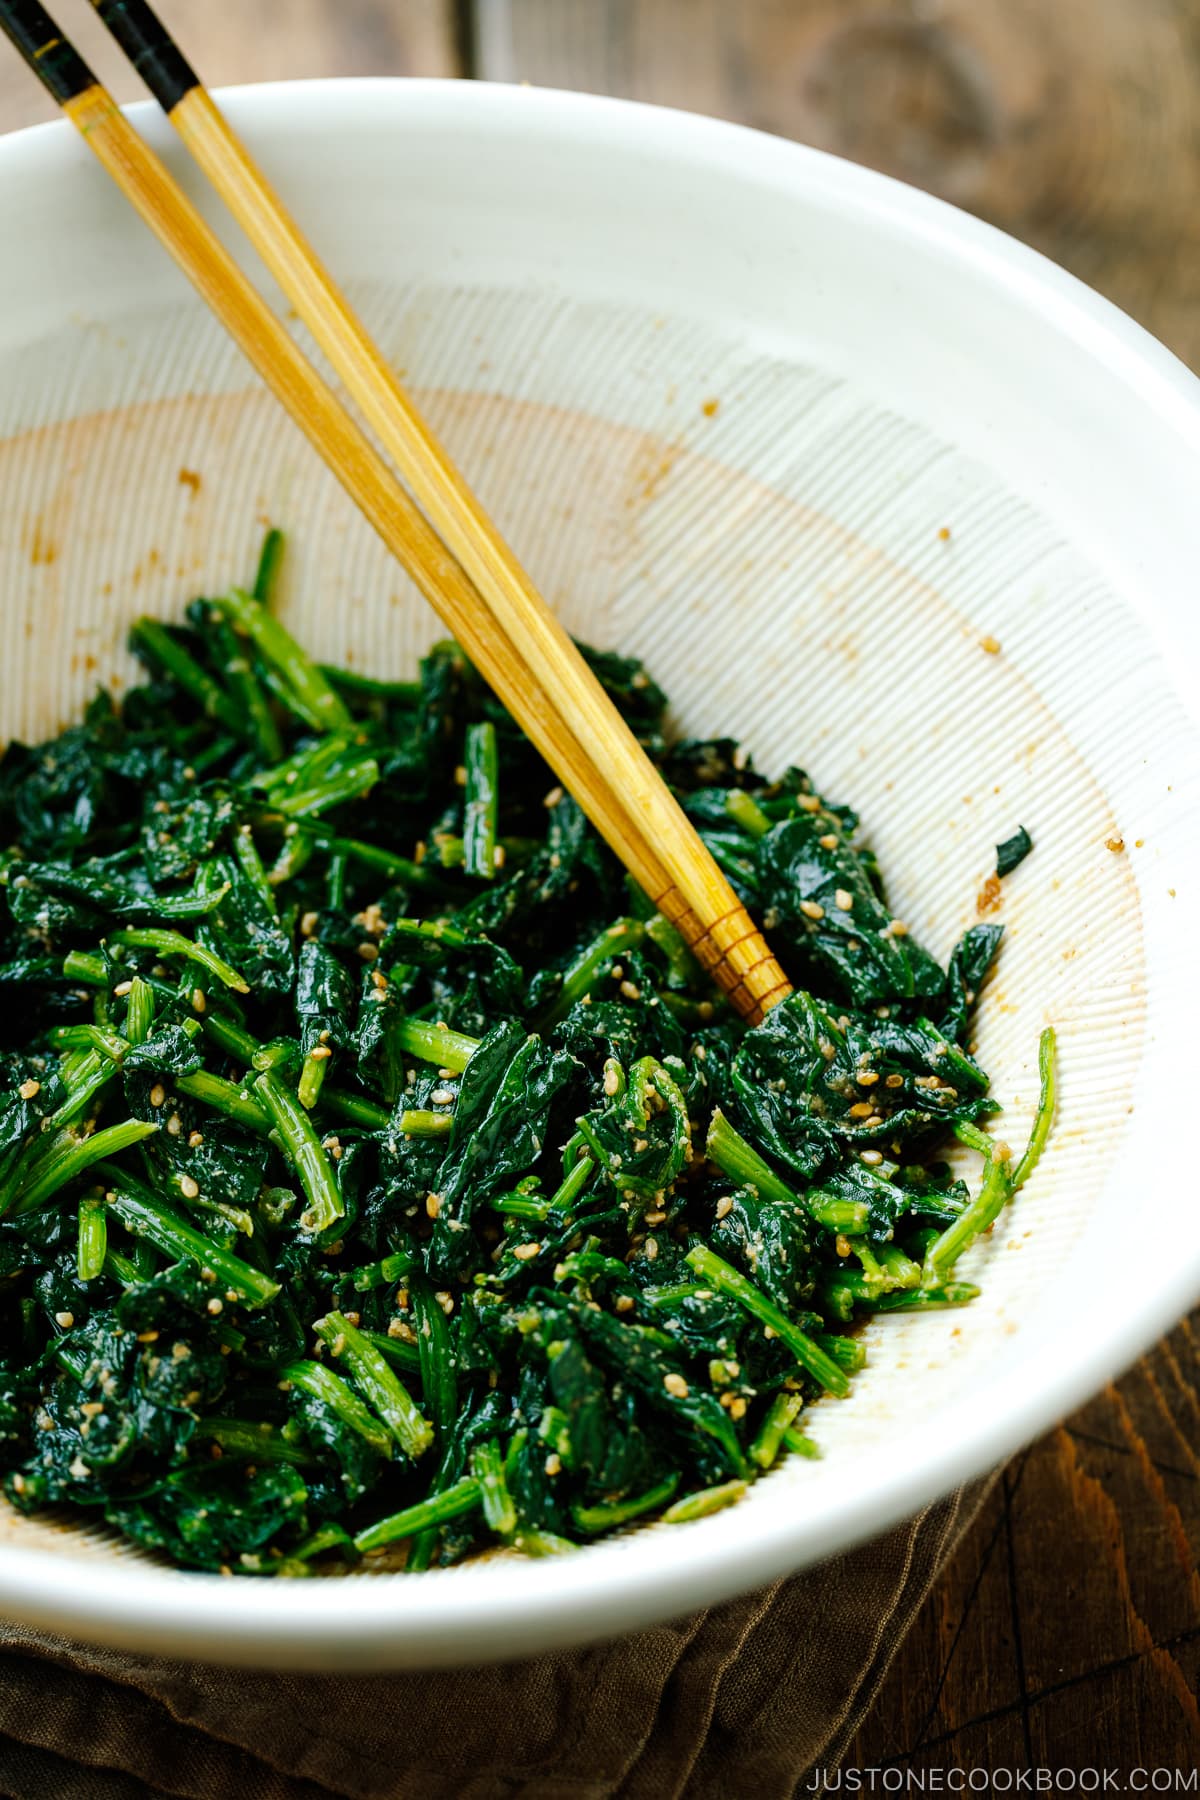 A Japanese suribachi mortar containing blanched spinach salad seasoned with sesame seeds, soy sauce, and sugar.